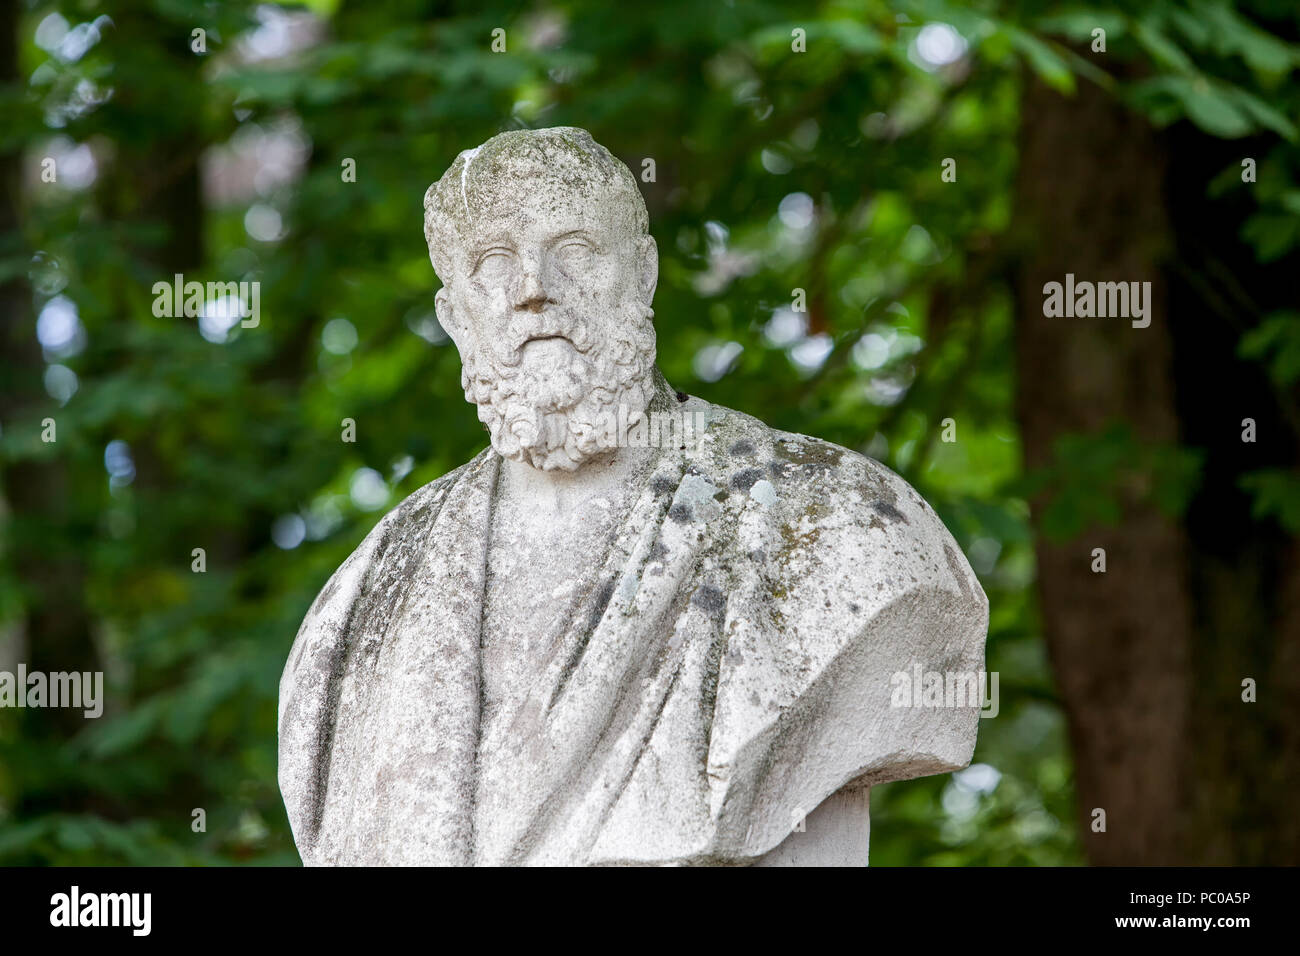 Socrates, 469-399 BC, philosopher of ancient Greece, bust at Nordkirchen Moated Palace, Germany Stock Photo